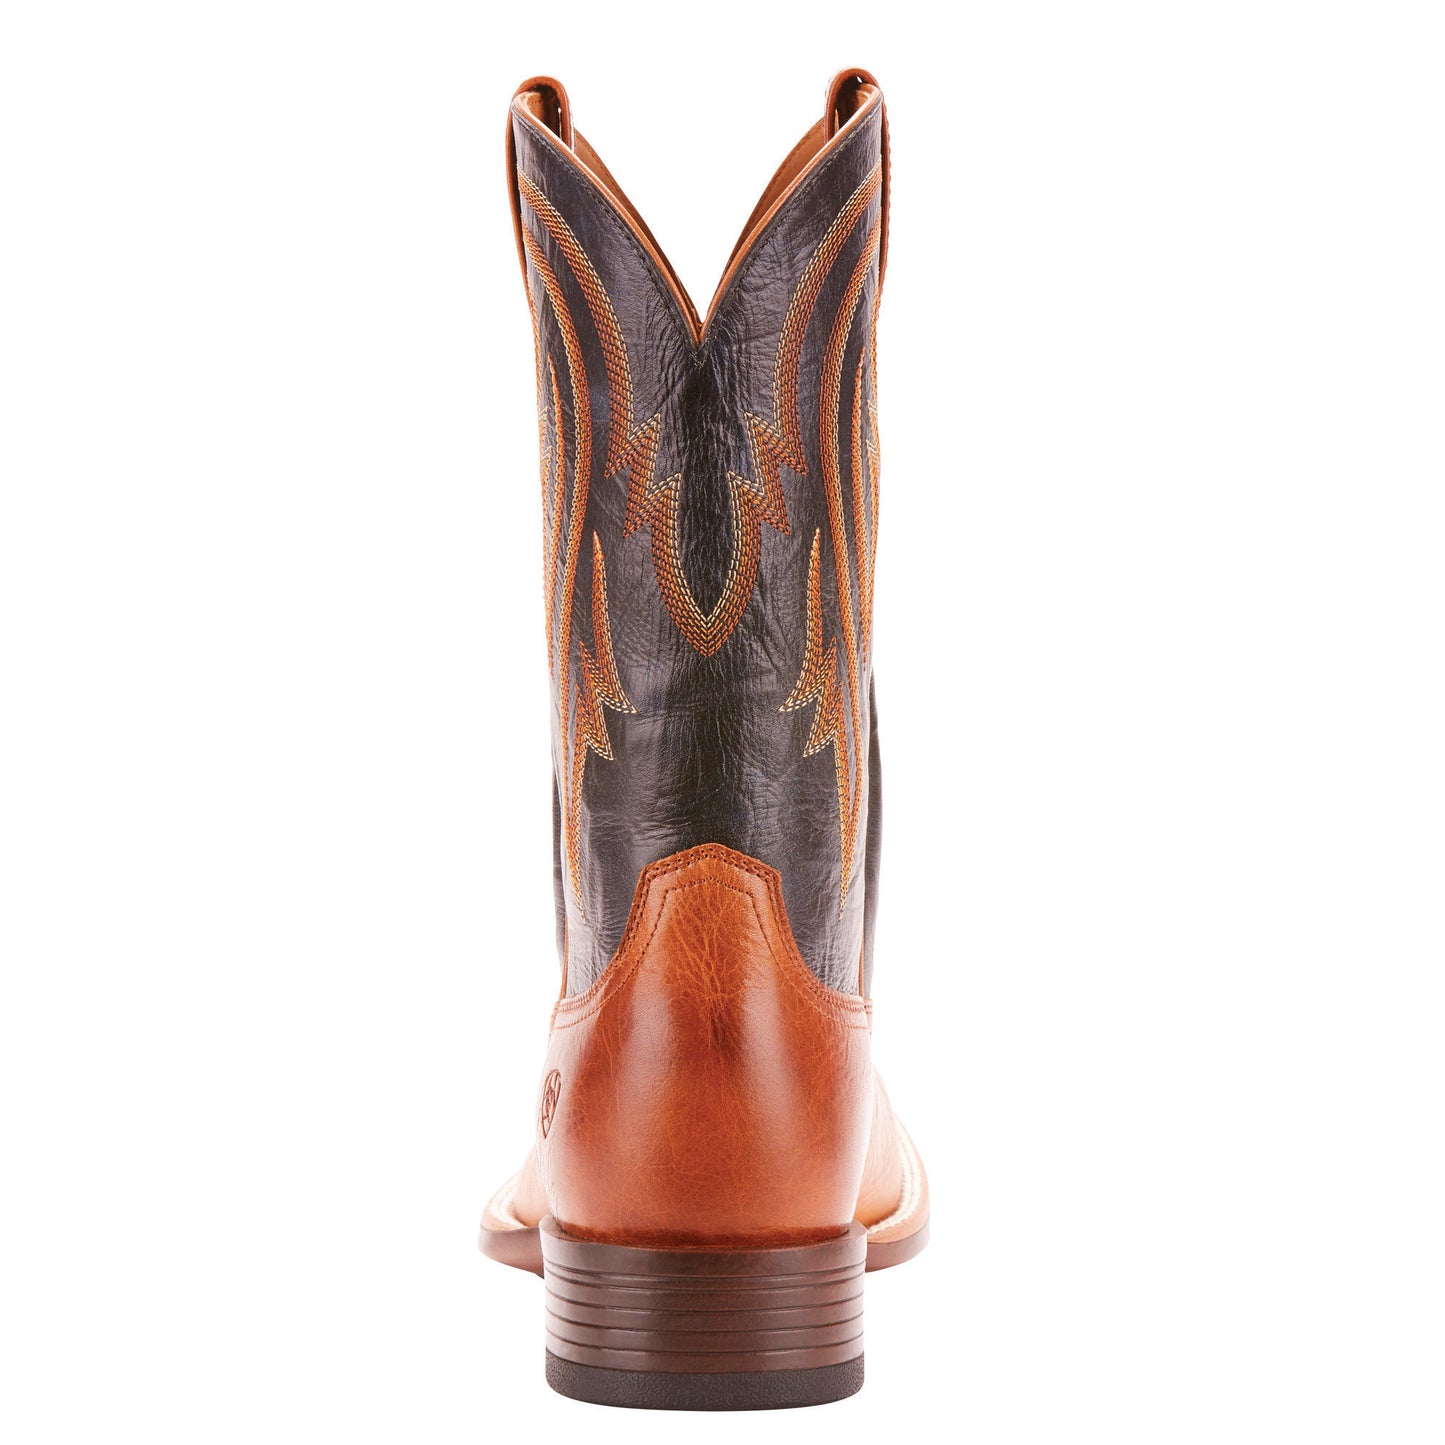 Ariat Plano Western Boot 10025166